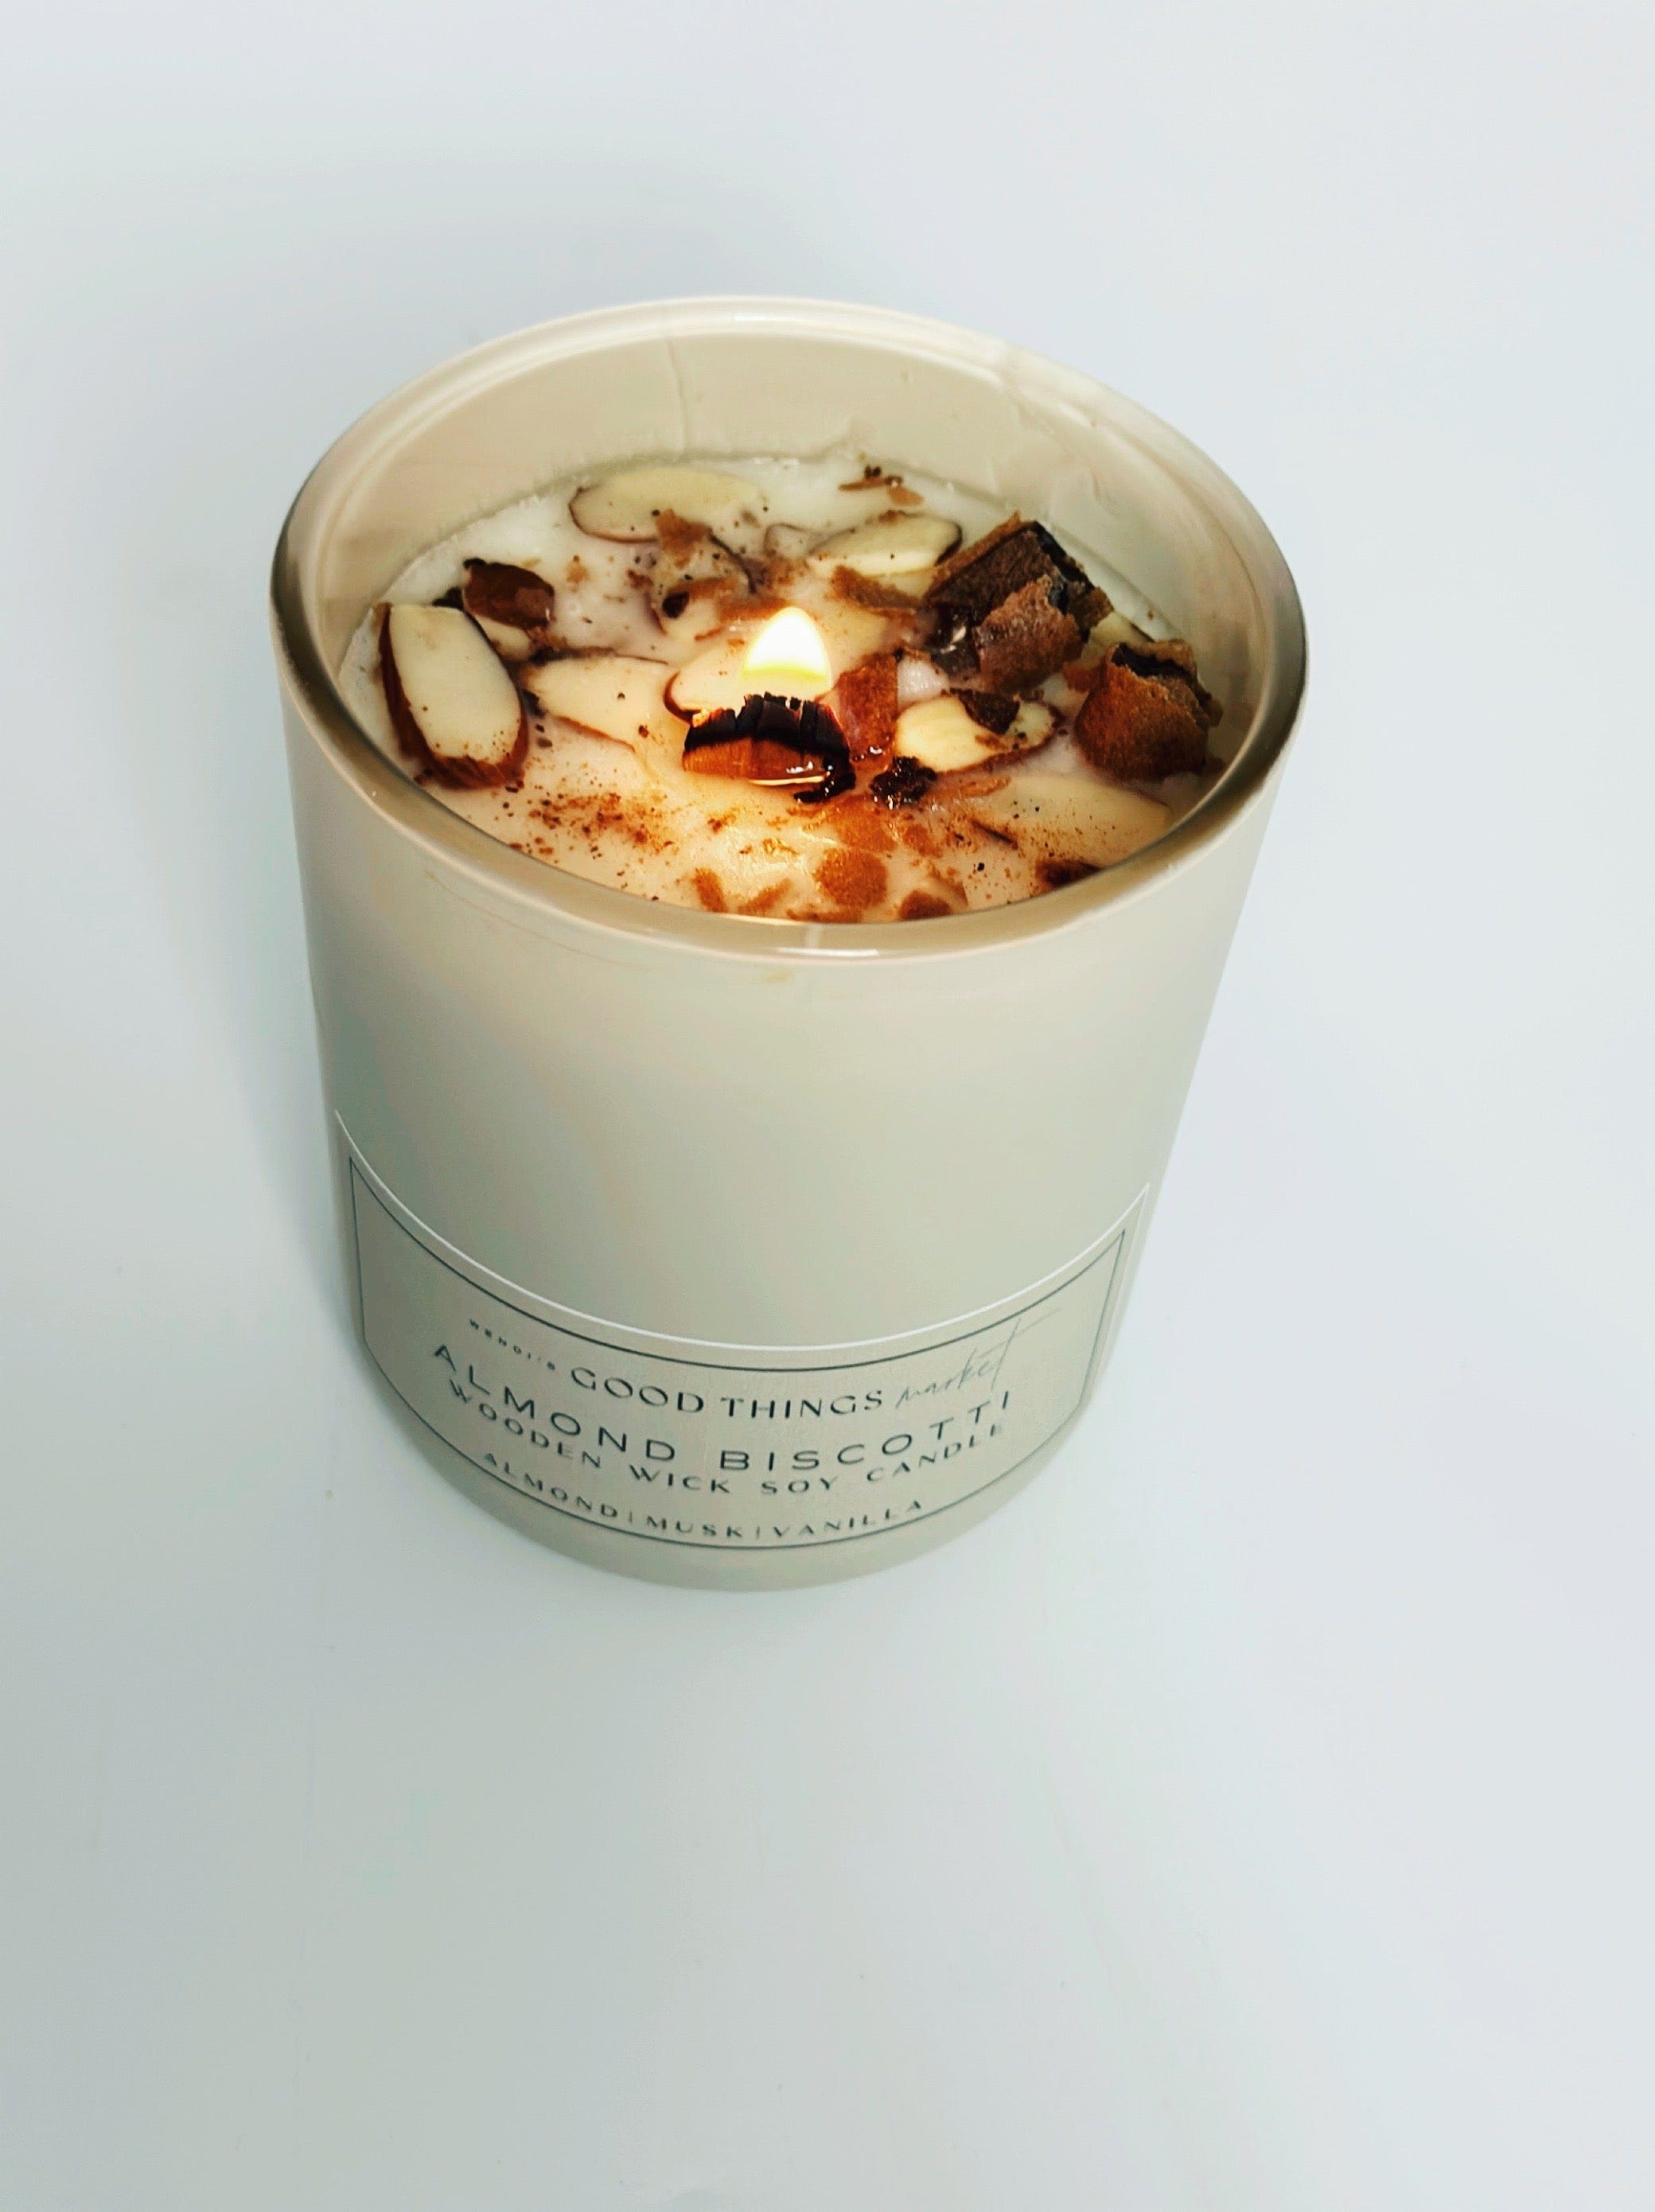 wendi's good things market, wooden wick soy candle